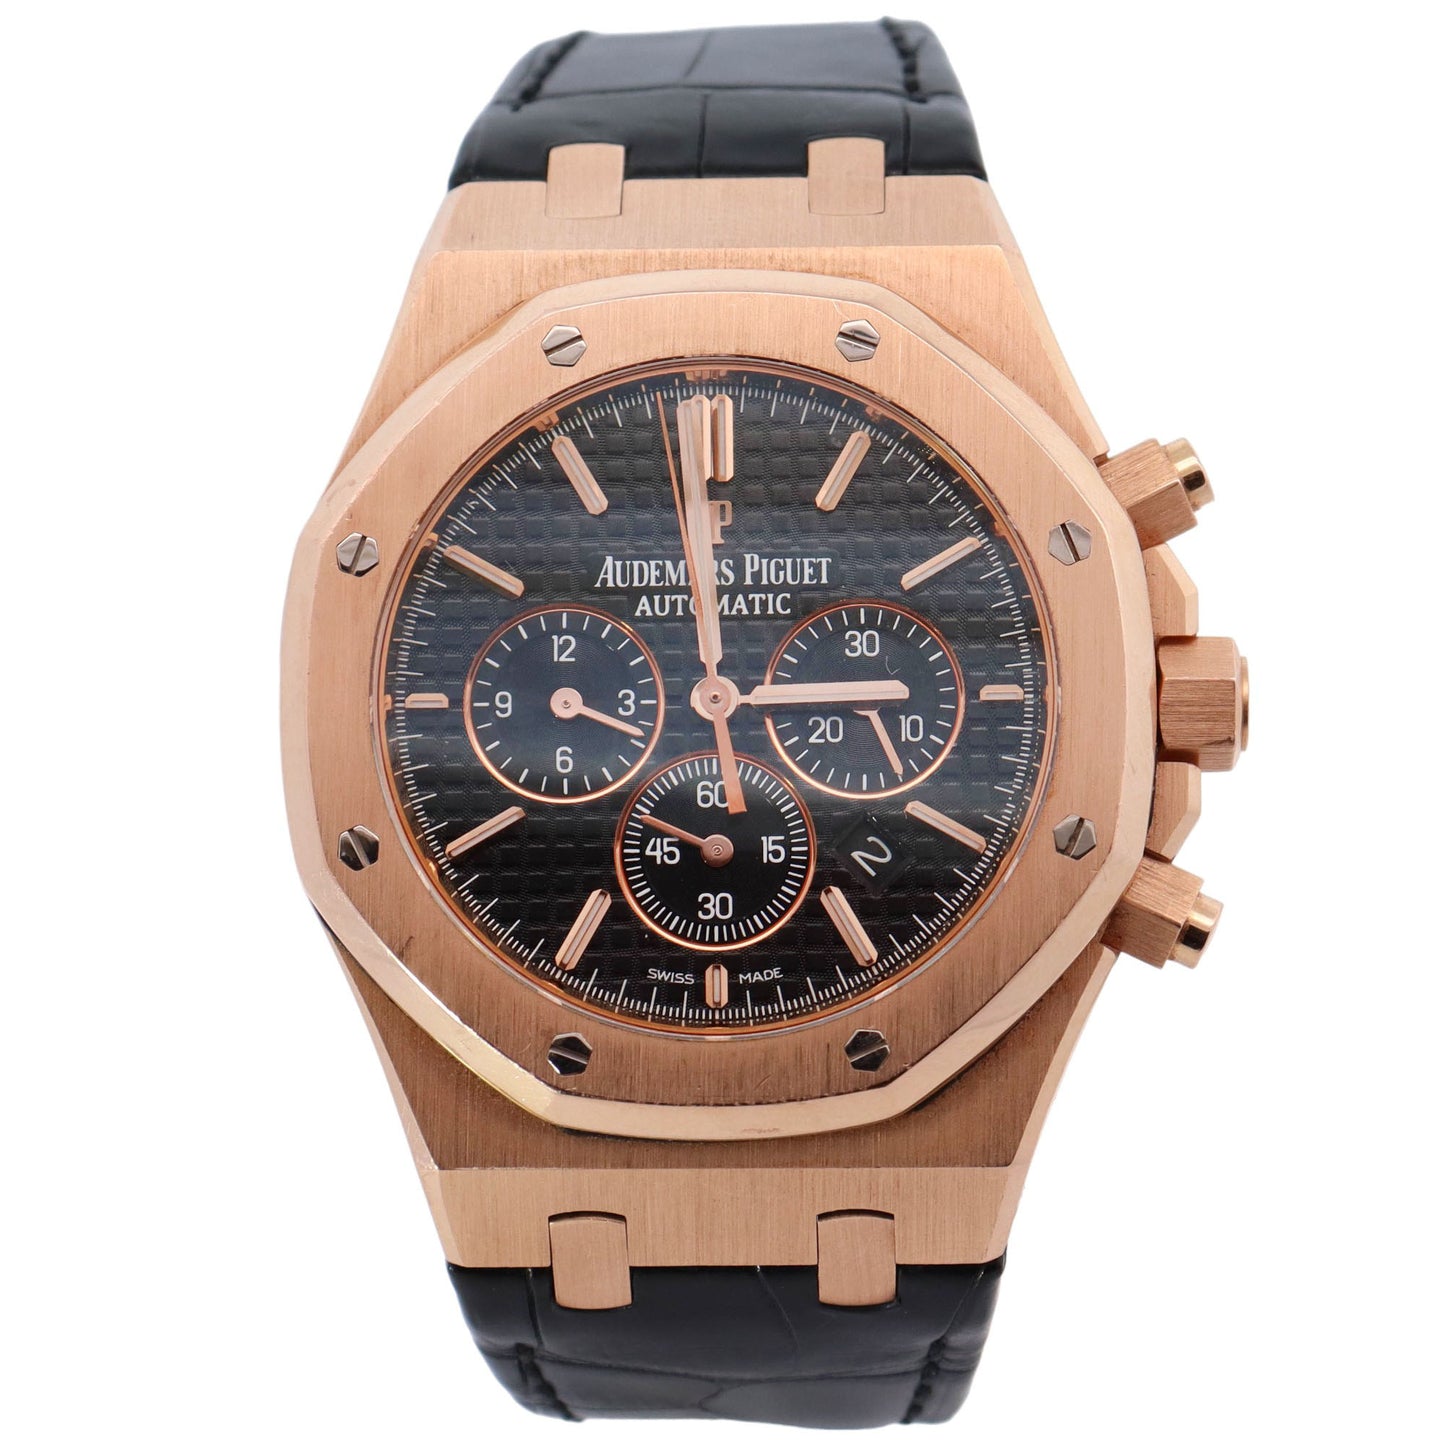 Audemars Piguet Royal Oak Rose Gold 41mm Black Chronograph Dial Watch Reference# 26320OR.OO.D002CR.01 - Happy Jewelers Fine Jewelry Lifetime Warranty